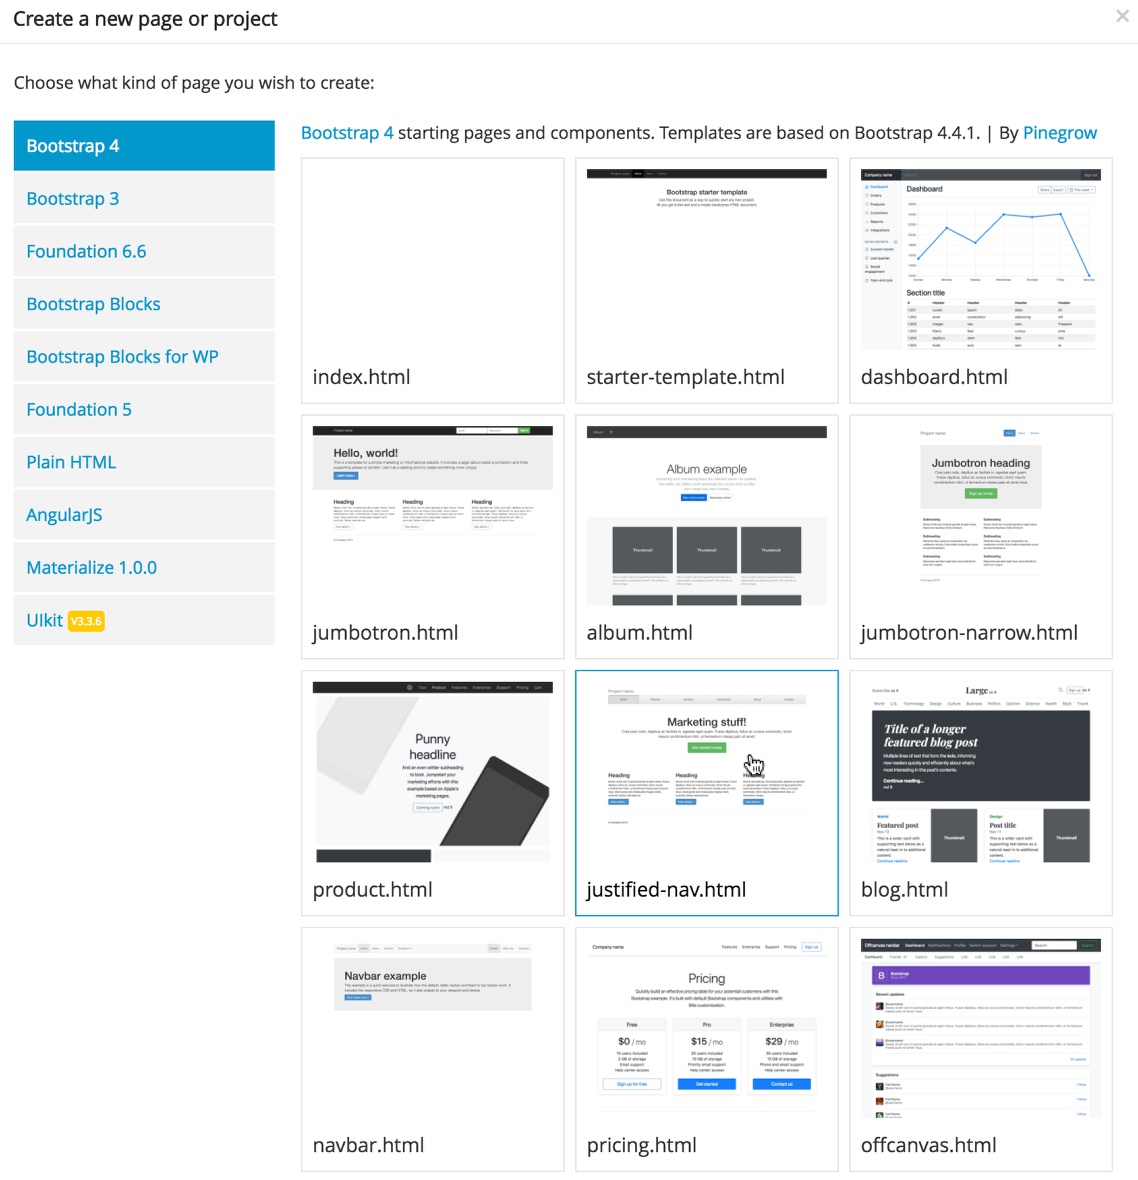 Screenshot of the Pinegrow Bootstrap 4 template selection